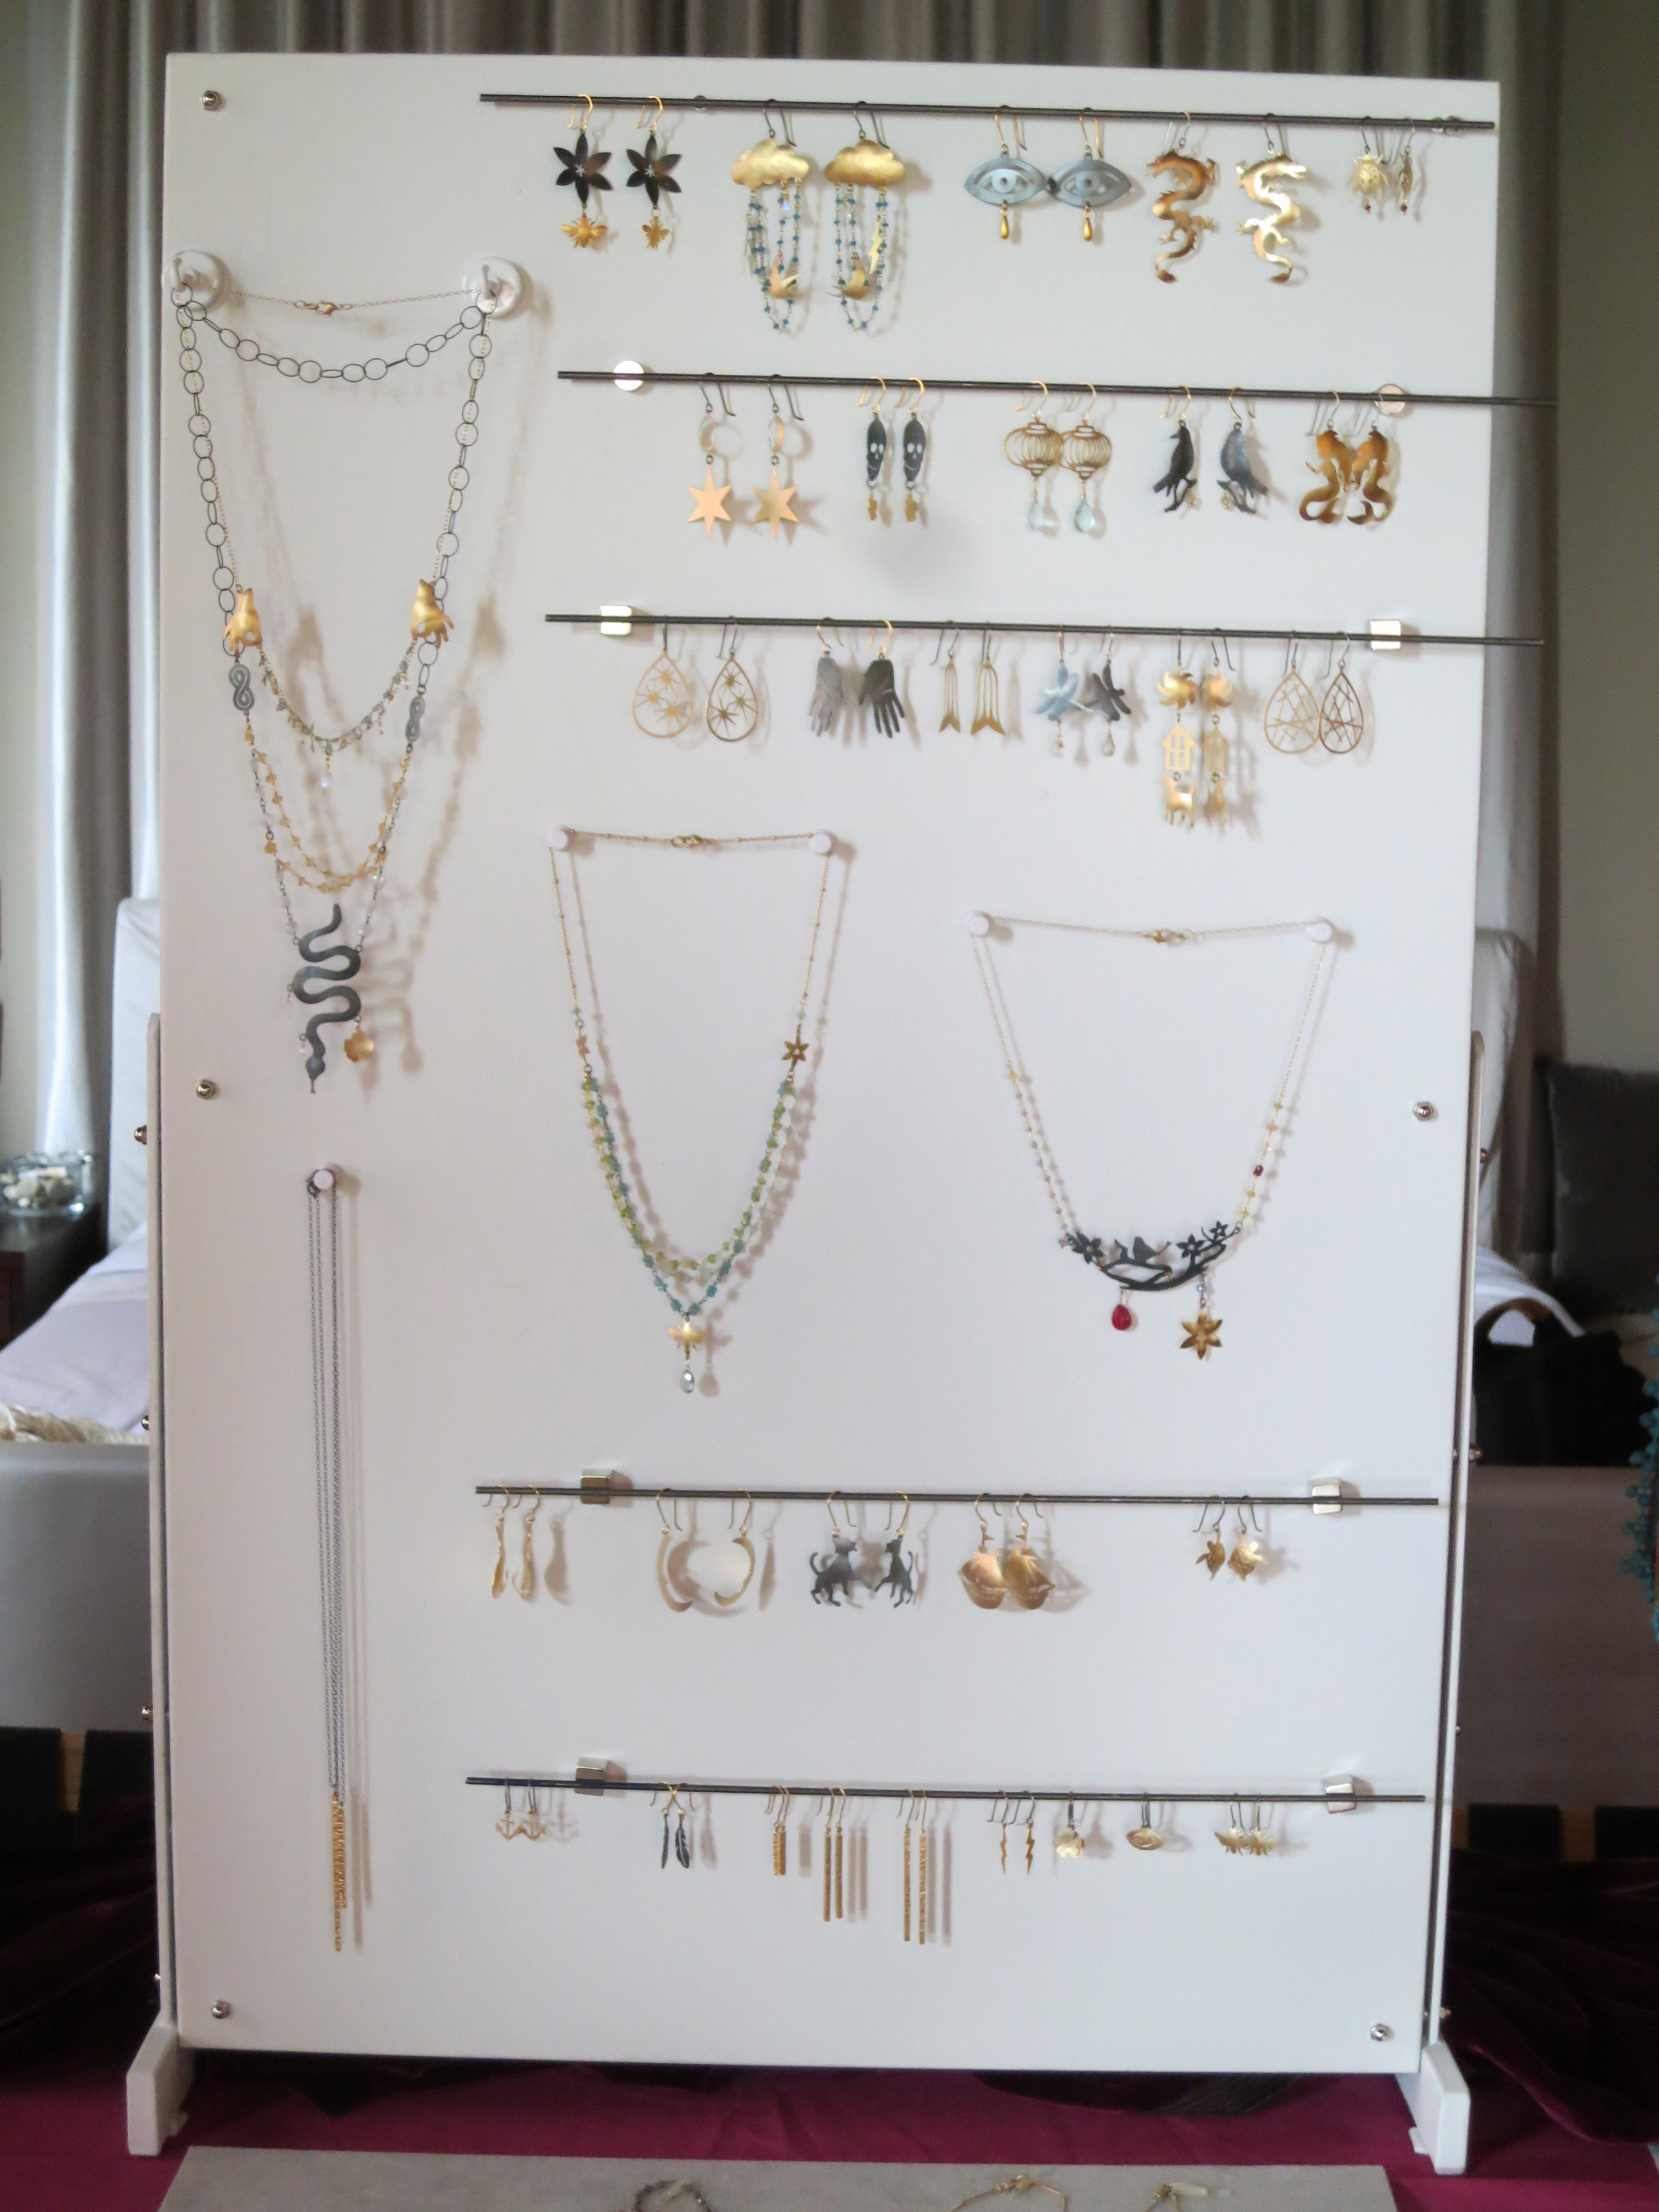 Handcrafted Jewelry By Jenne Rayburn